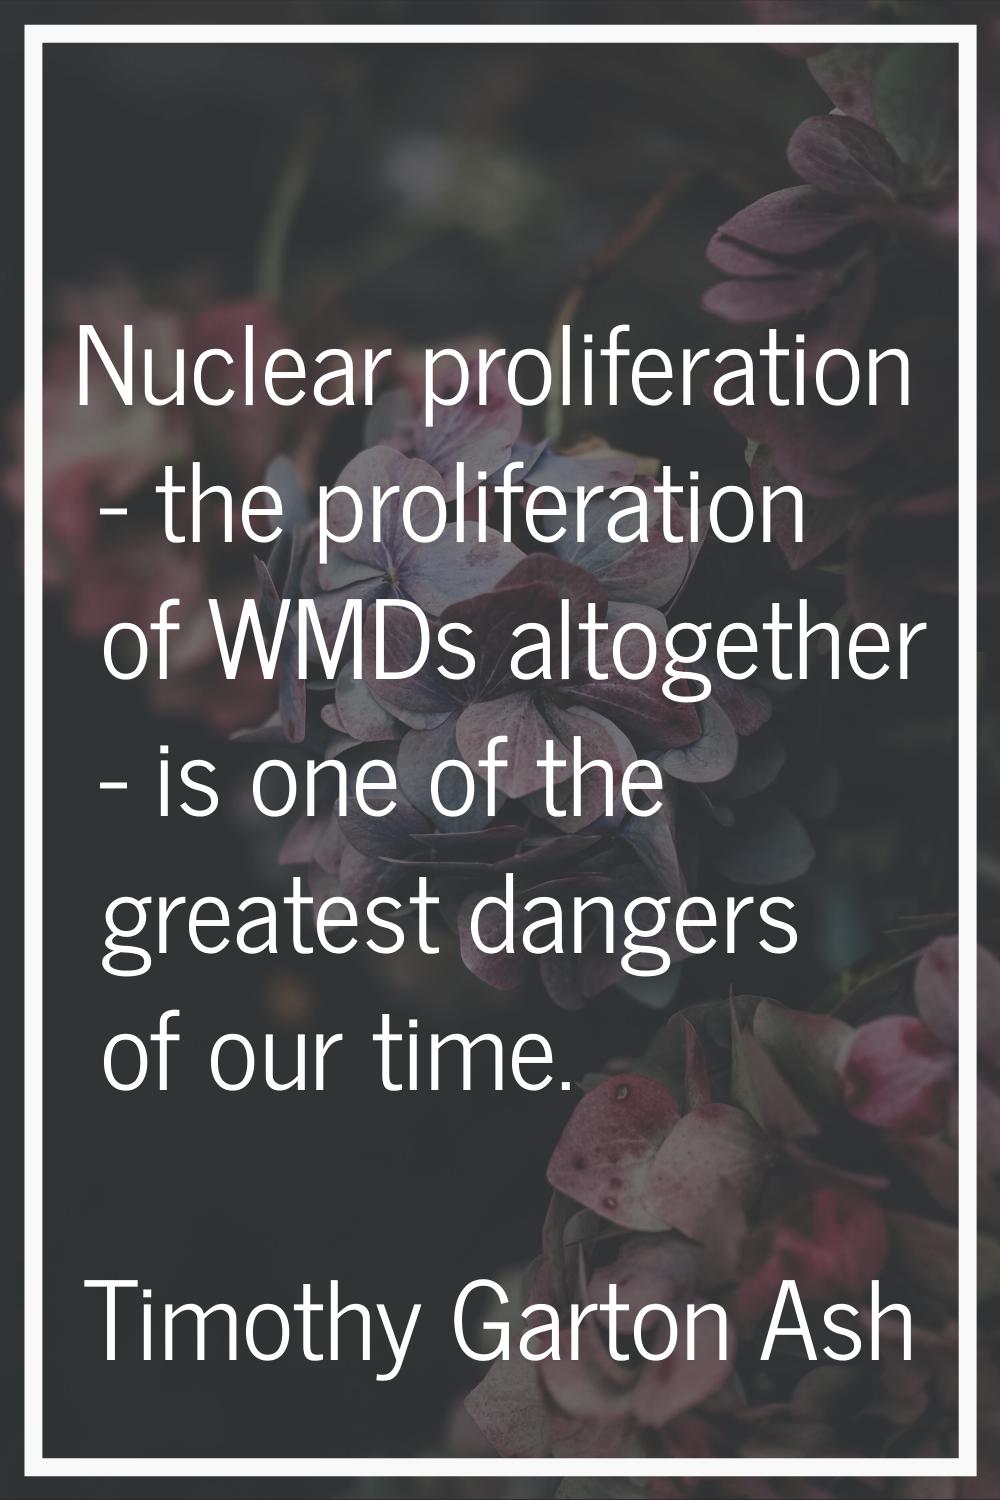 Nuclear proliferation - the proliferation of WMDs altogether - is one of the greatest dangers of ou